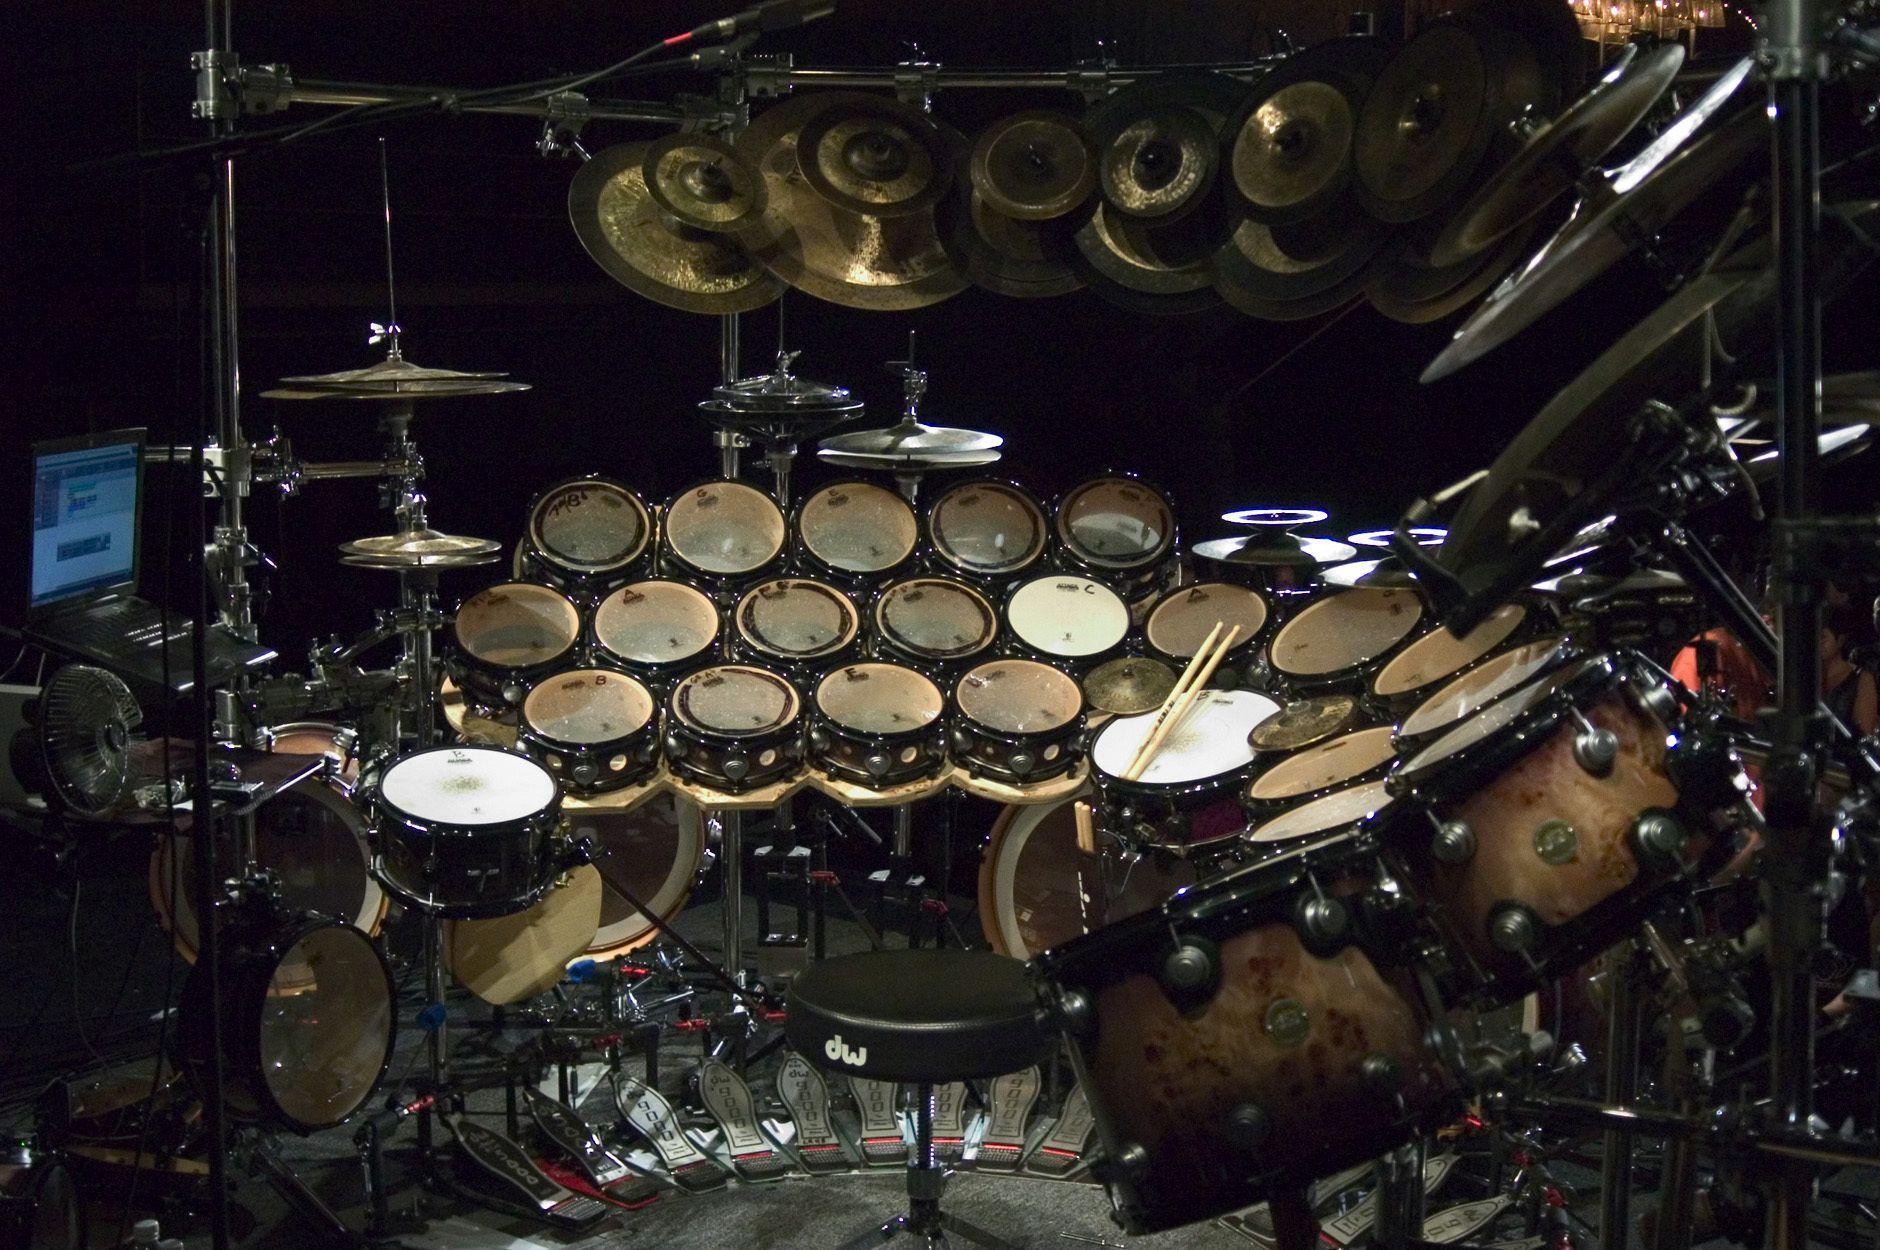 Drums image HUGE Drum Kit HD wallpaper and background photo